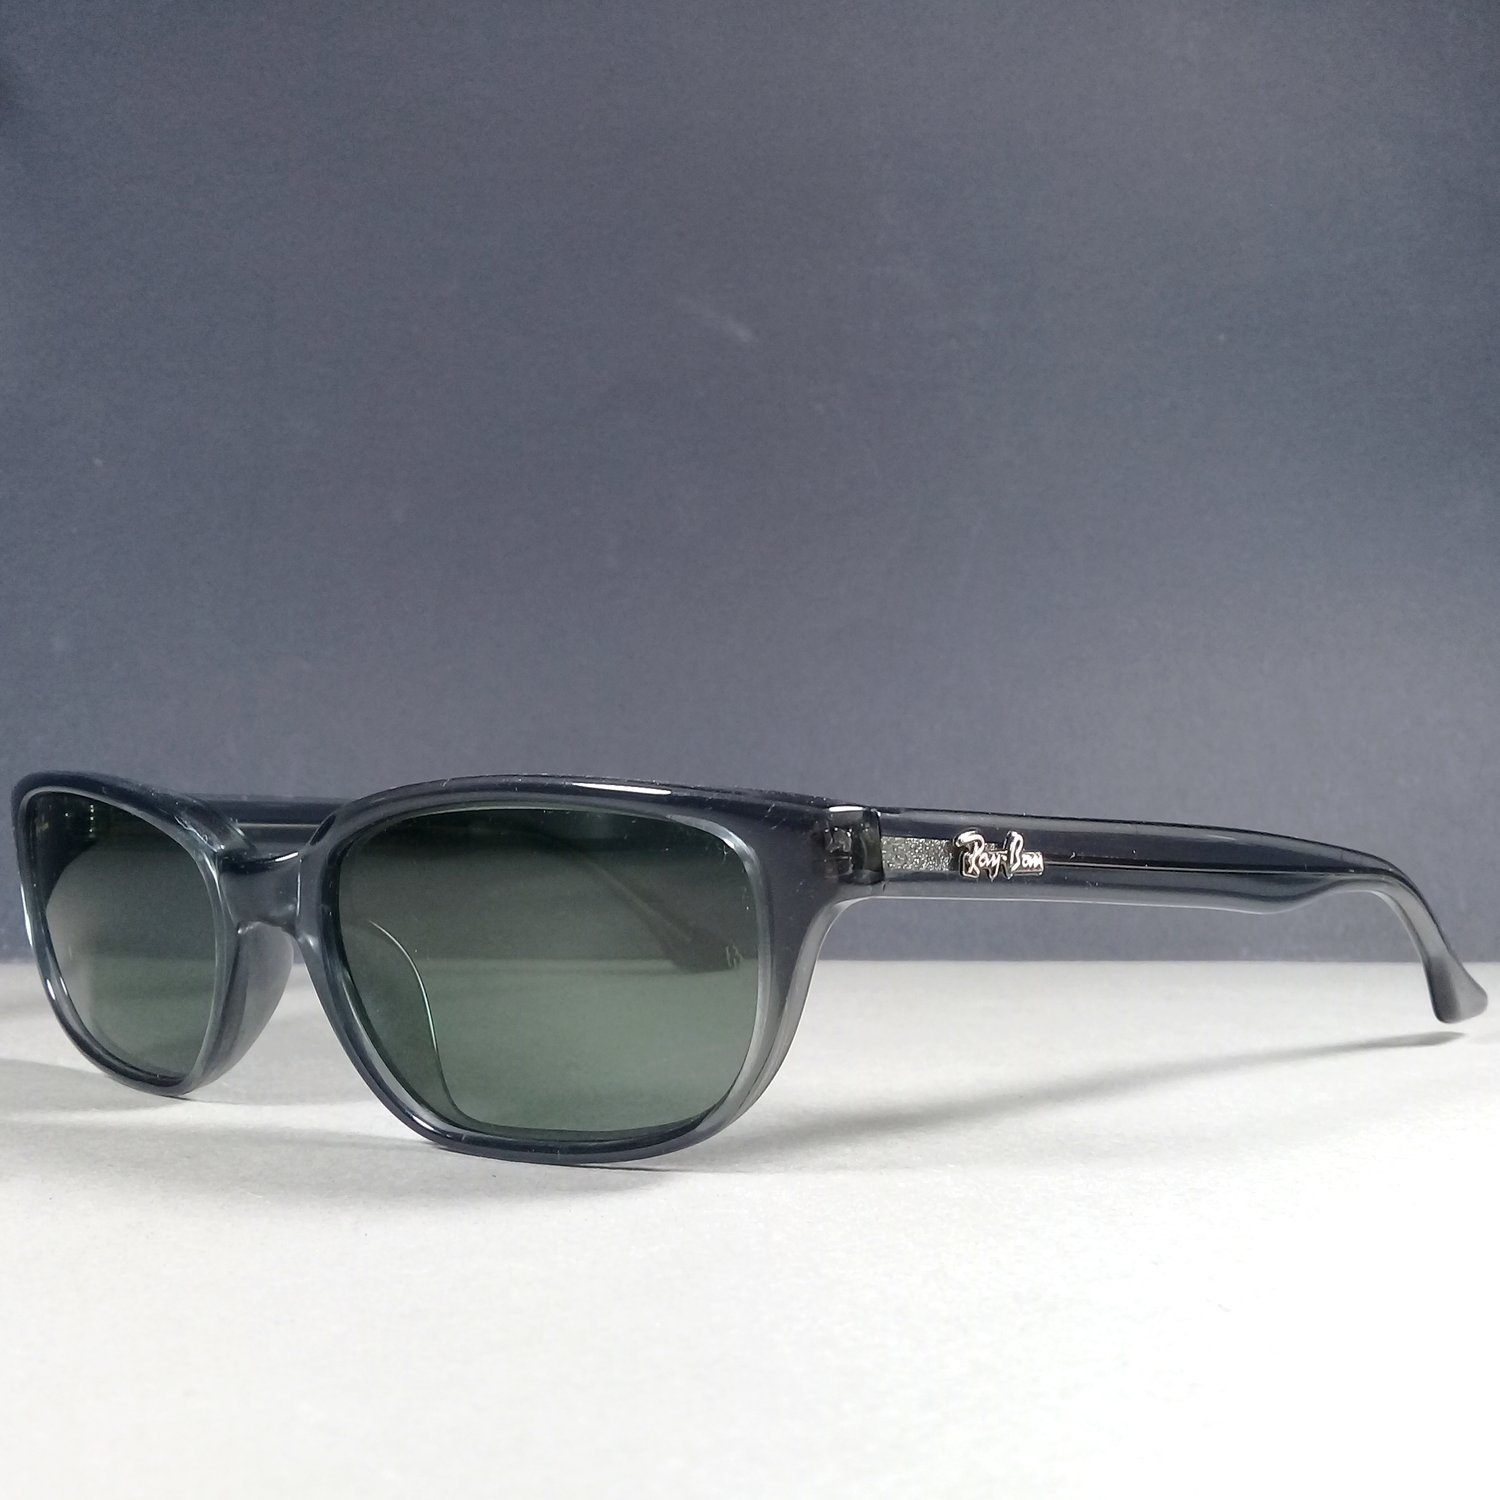 Ray Ban Bausch & Lomb W3093 Gray Translucent B&L Sunglasses Assembled in Italy